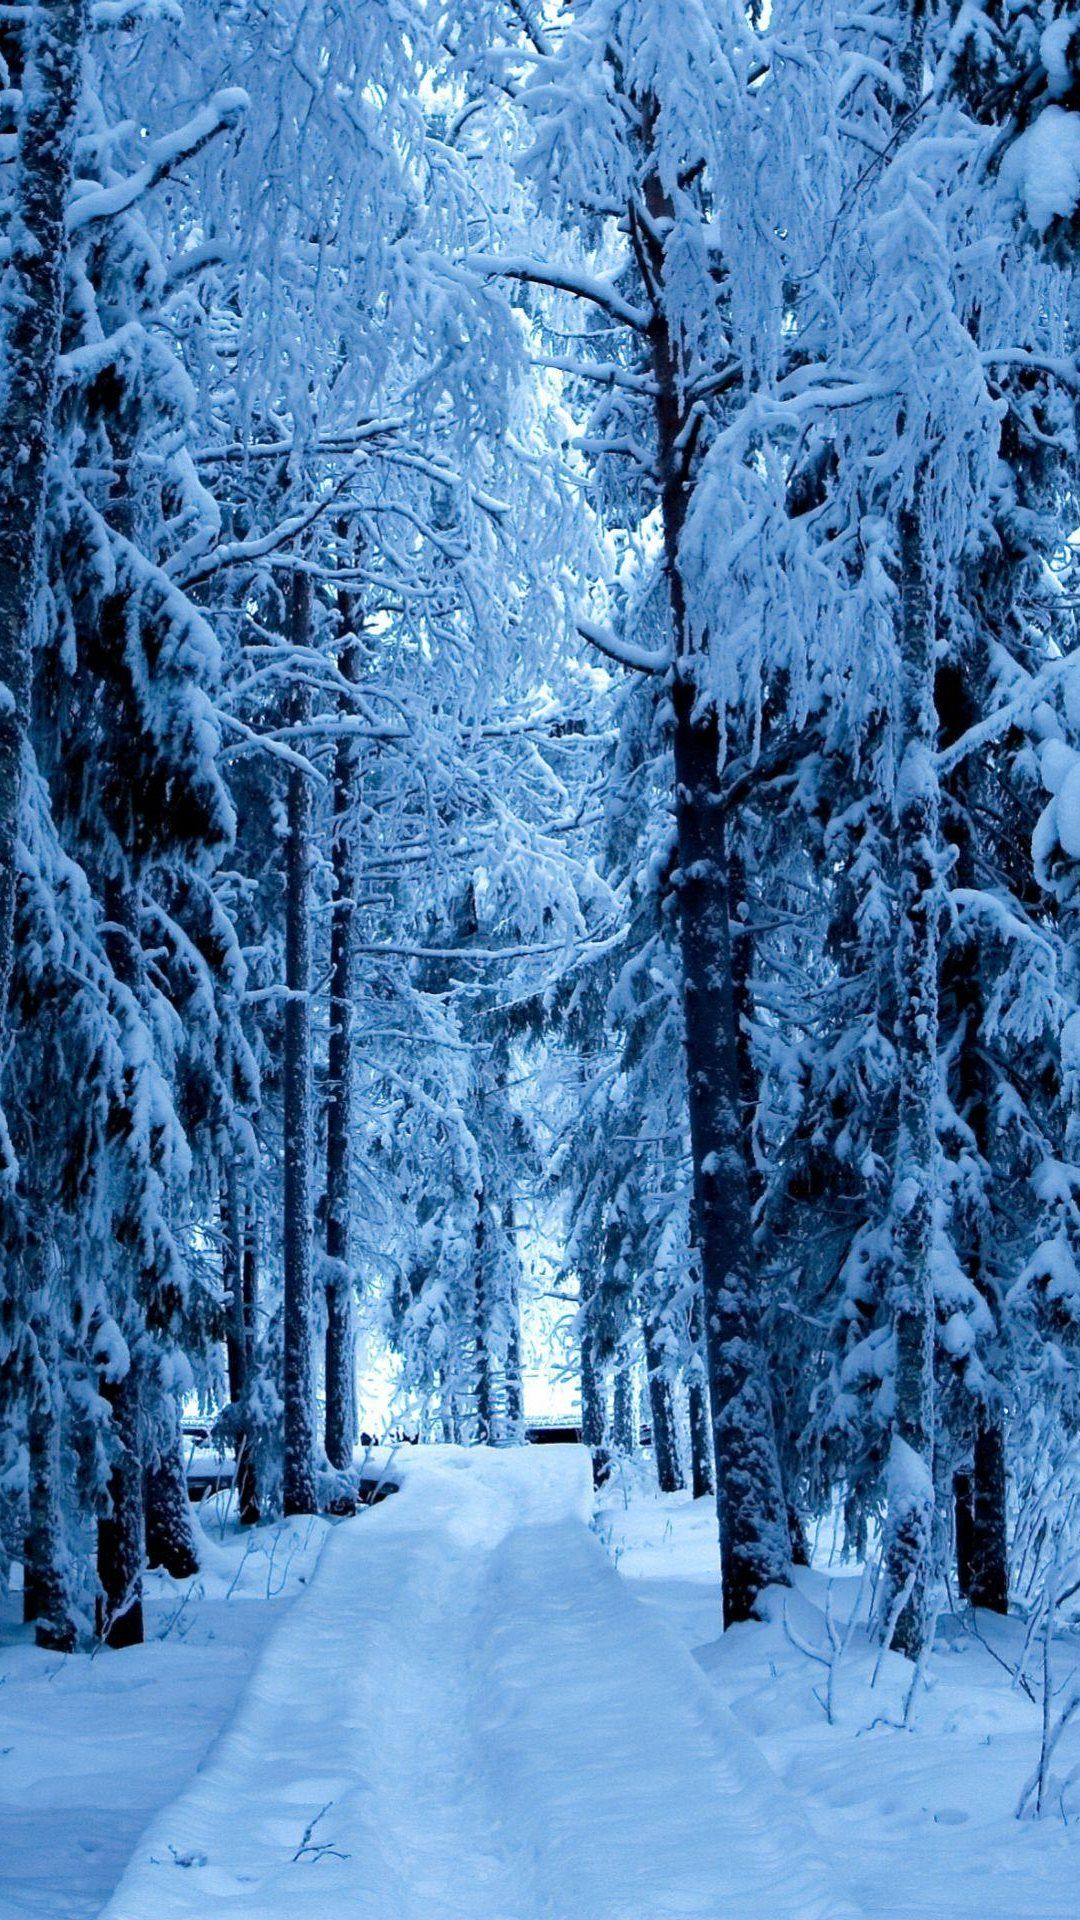 1080x1920 Snow Forest Blue Ice | Android Wallpapers | Snowfall wallpaper, Winter wonderland wallpaper, Christmas wallpaper backgrounds